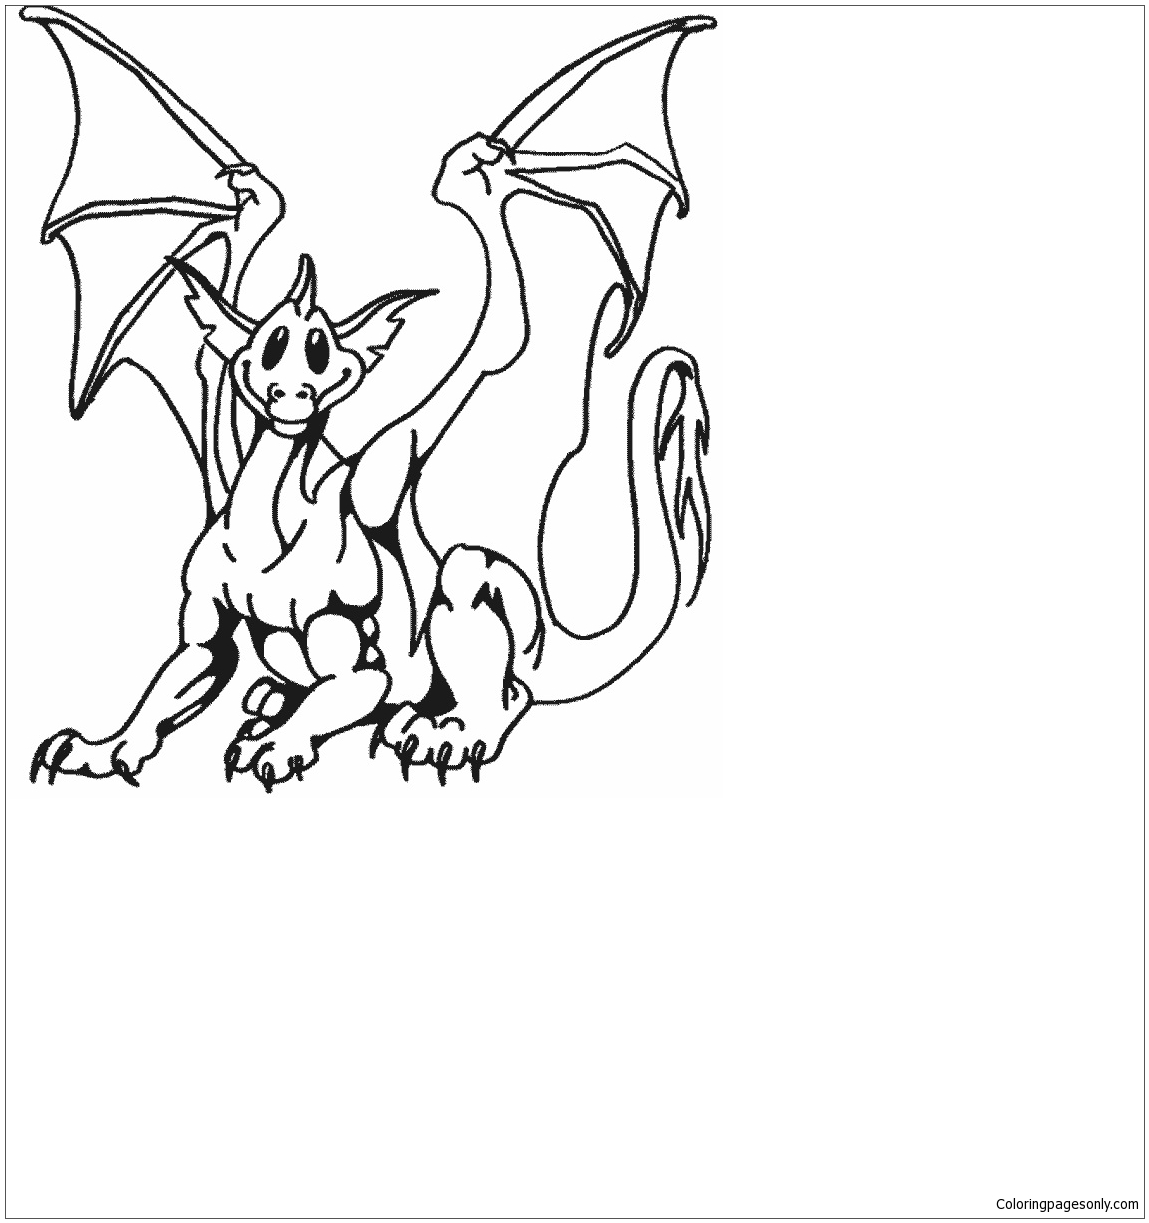 Dragon Souriant Coloring Page